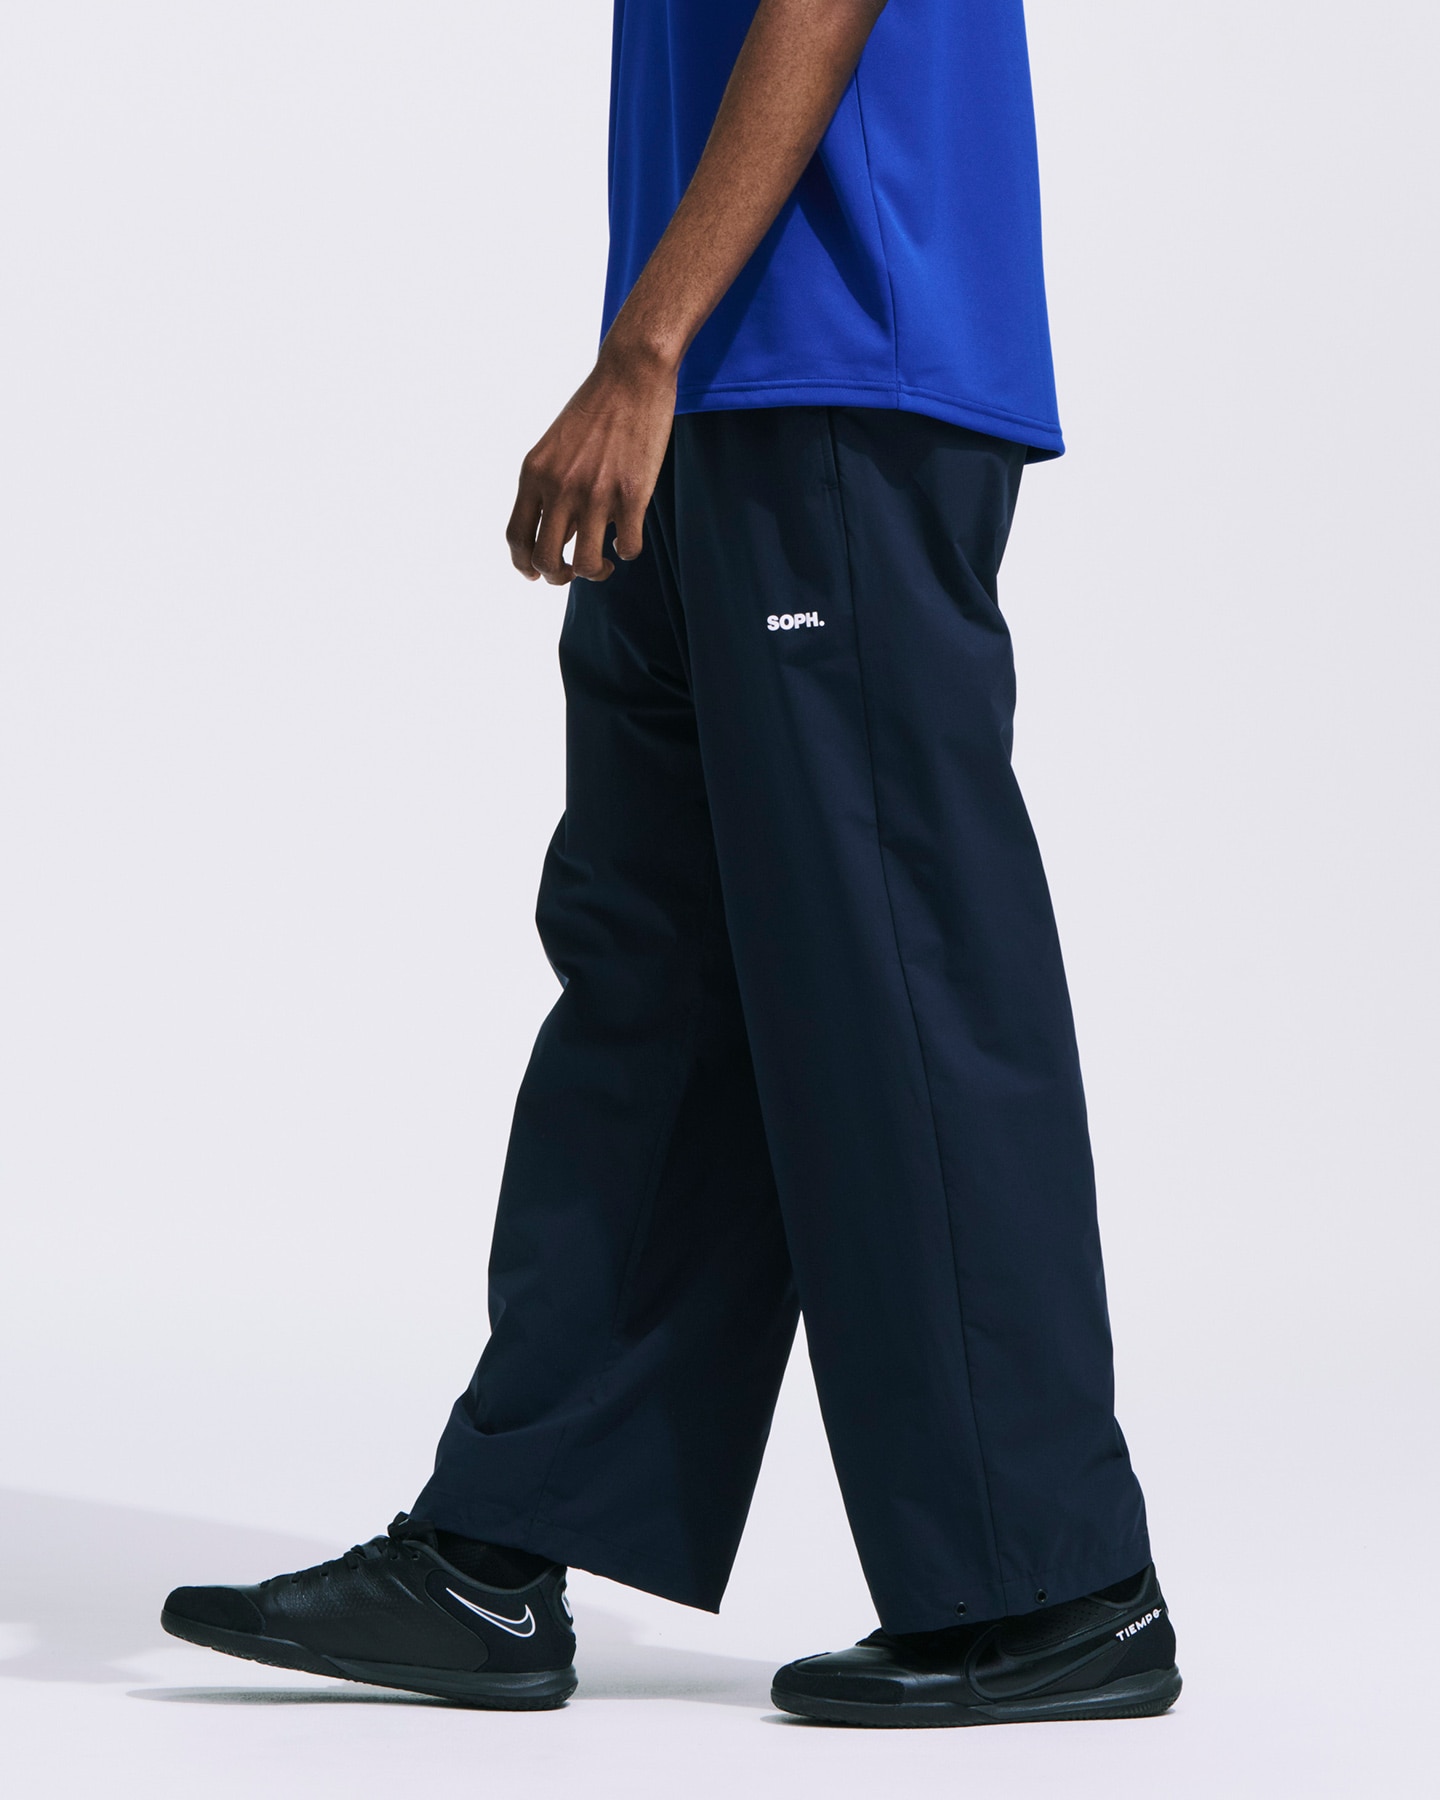 SOPH. | STRETCH LIGHT WEIGHT RELAX PANTS(L NAVY):